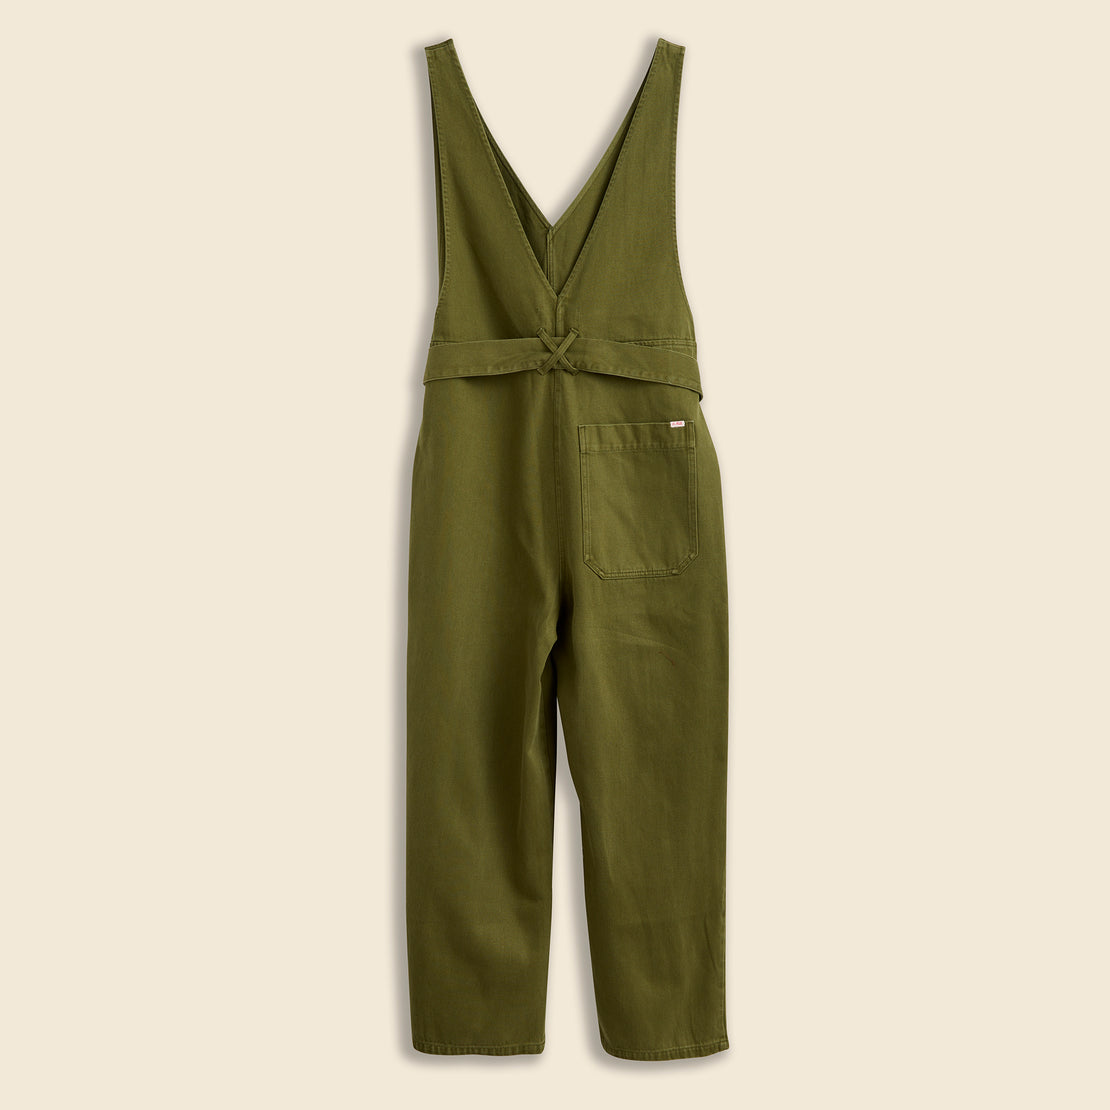 Ollie Overall - Army Olive - Alex Mill - STAG Provisions - W - Onepiece - Overalls